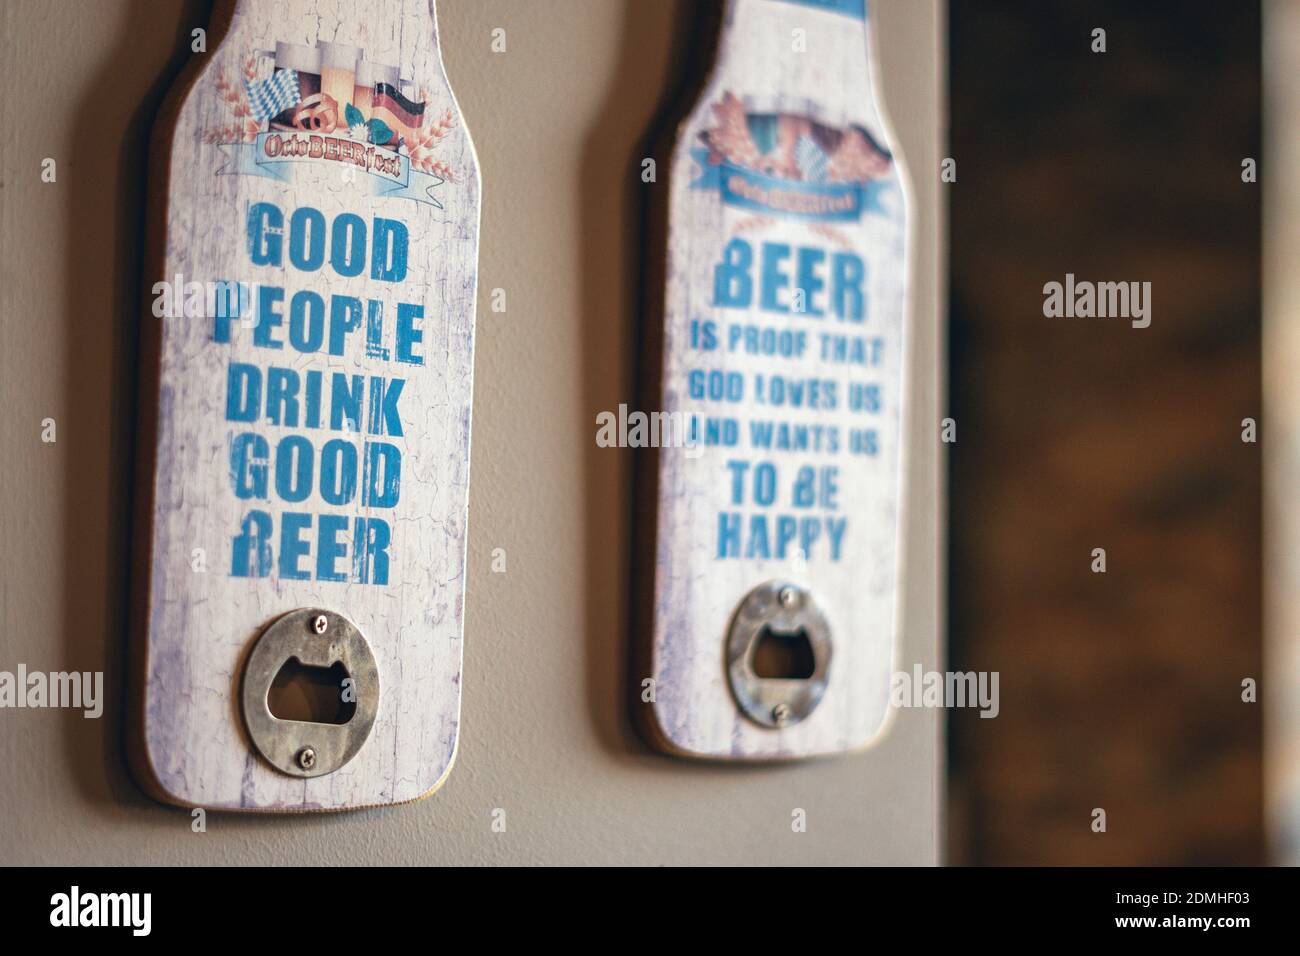 https://c8.alamy.com/comp/2DMHF03/a-closeup-shot-of-bottle-openers-with-funny-beer-quotes-2DMHF03.jpg